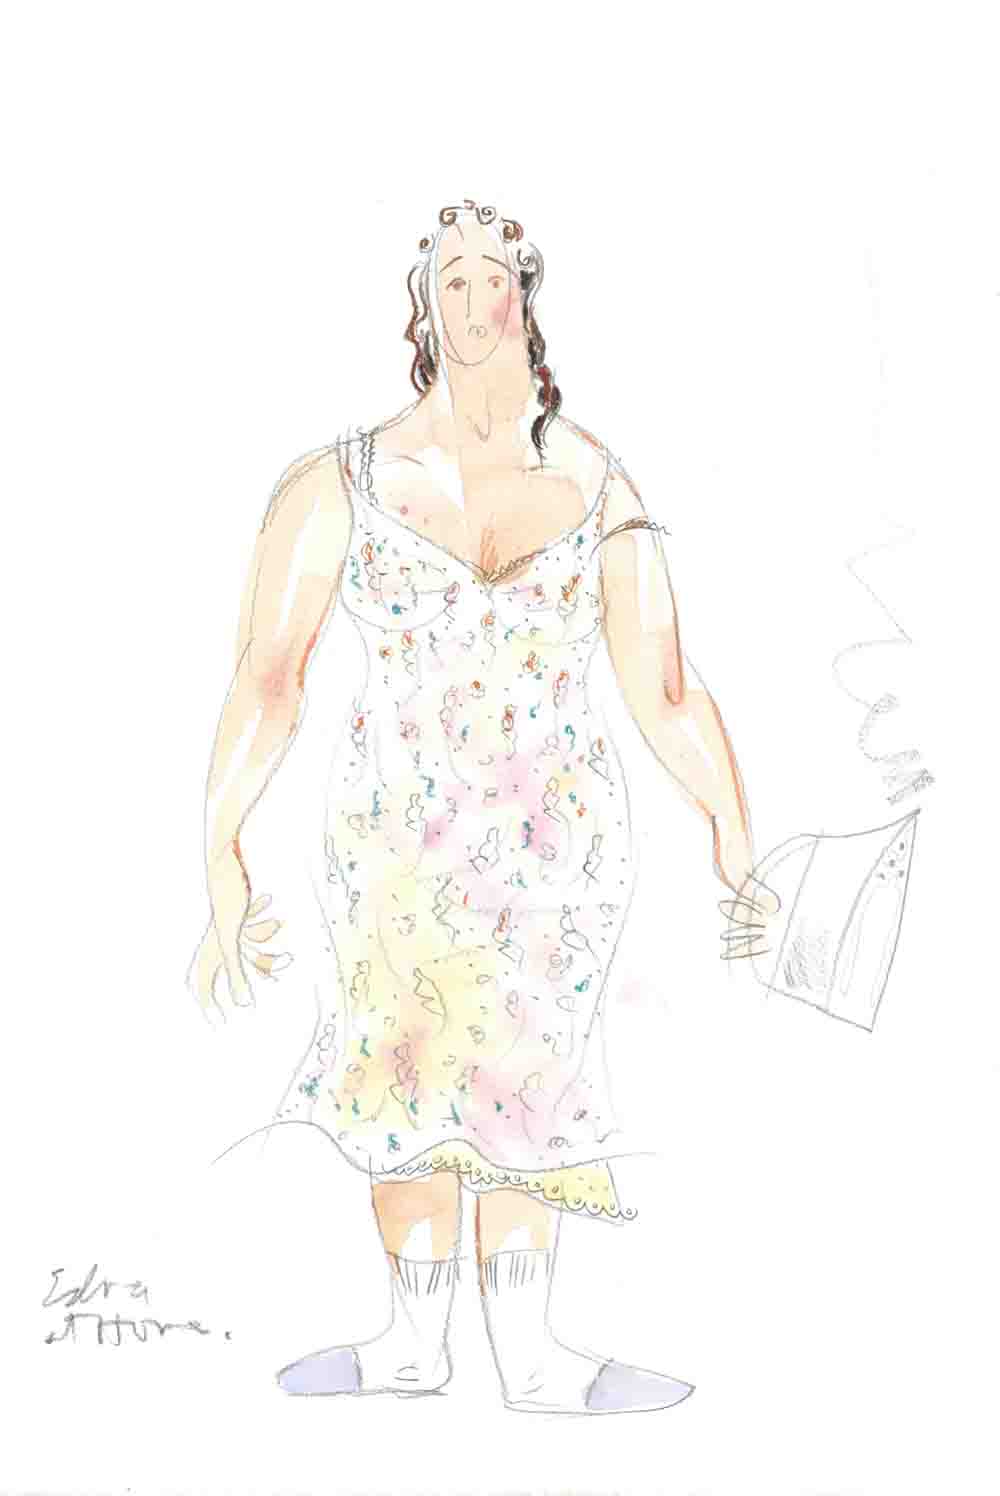 Sketch for Harvey Fierstein as Edna Turnblad, Hairspray, “Nicest Kids”, Graphite/ Watercolor/ Gouache/ Colored pencil on Watercolor paper, 15 x 22 ½ inches